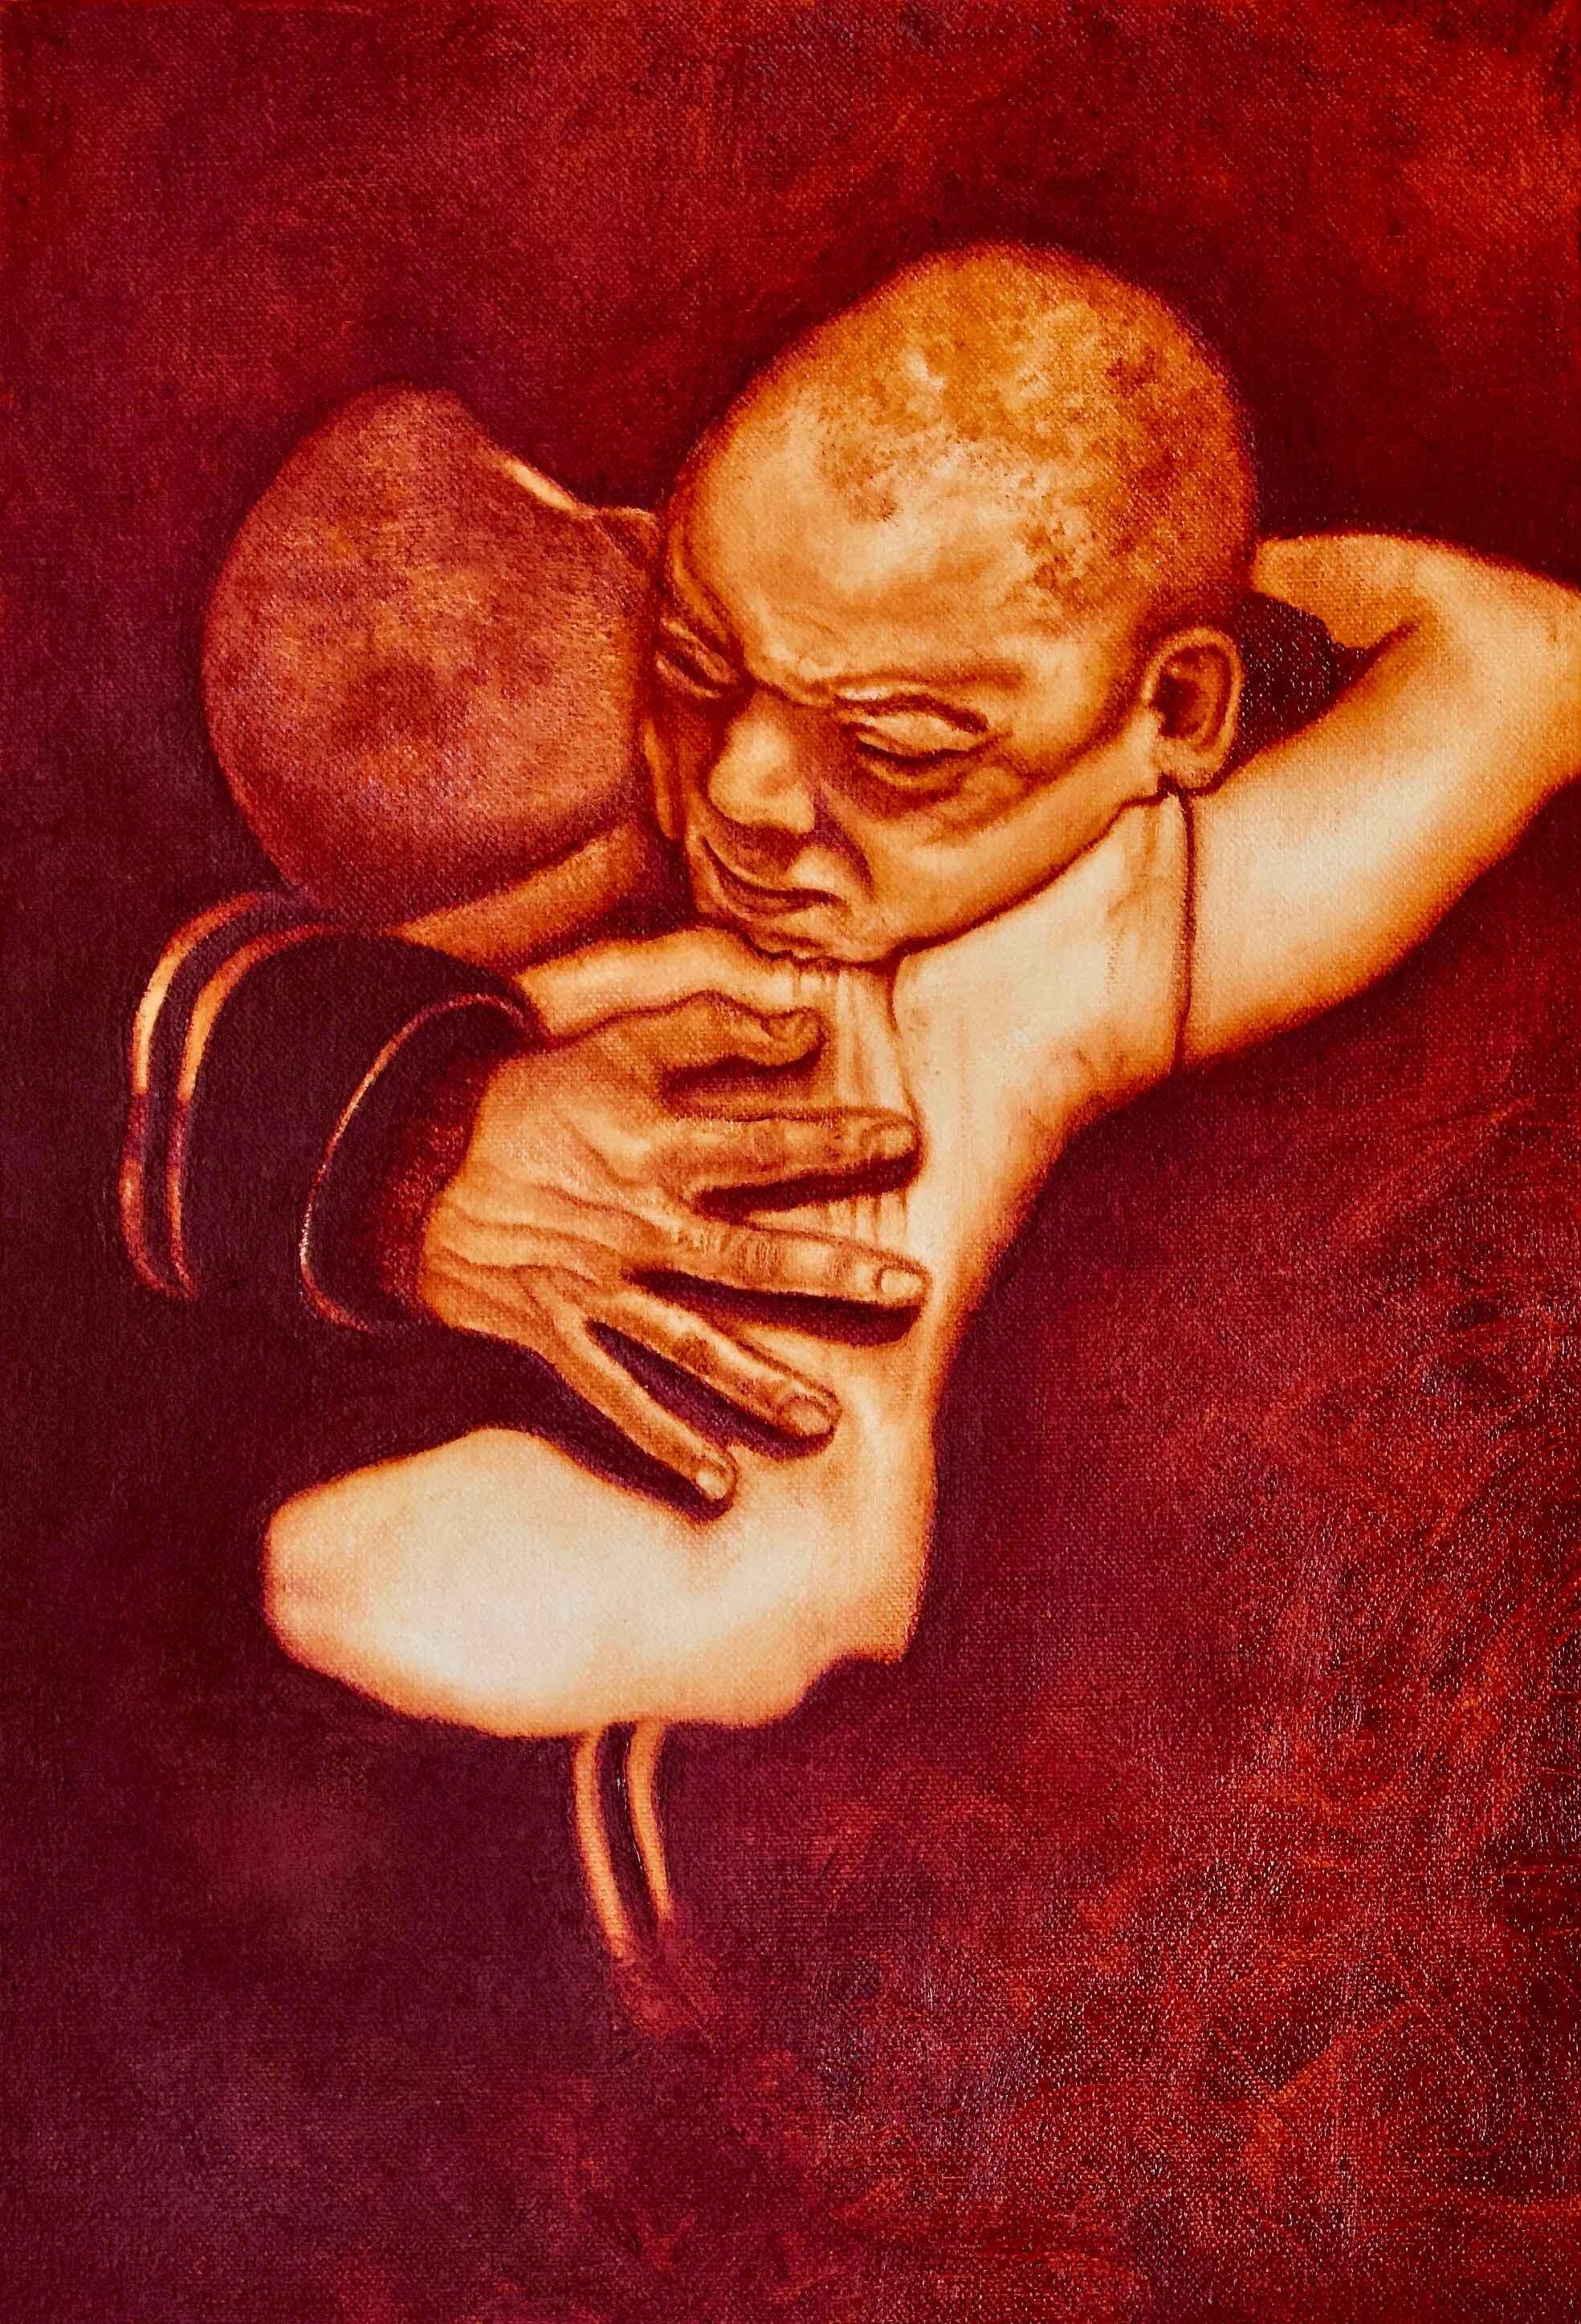 United in Grief (Oil on Canvas)